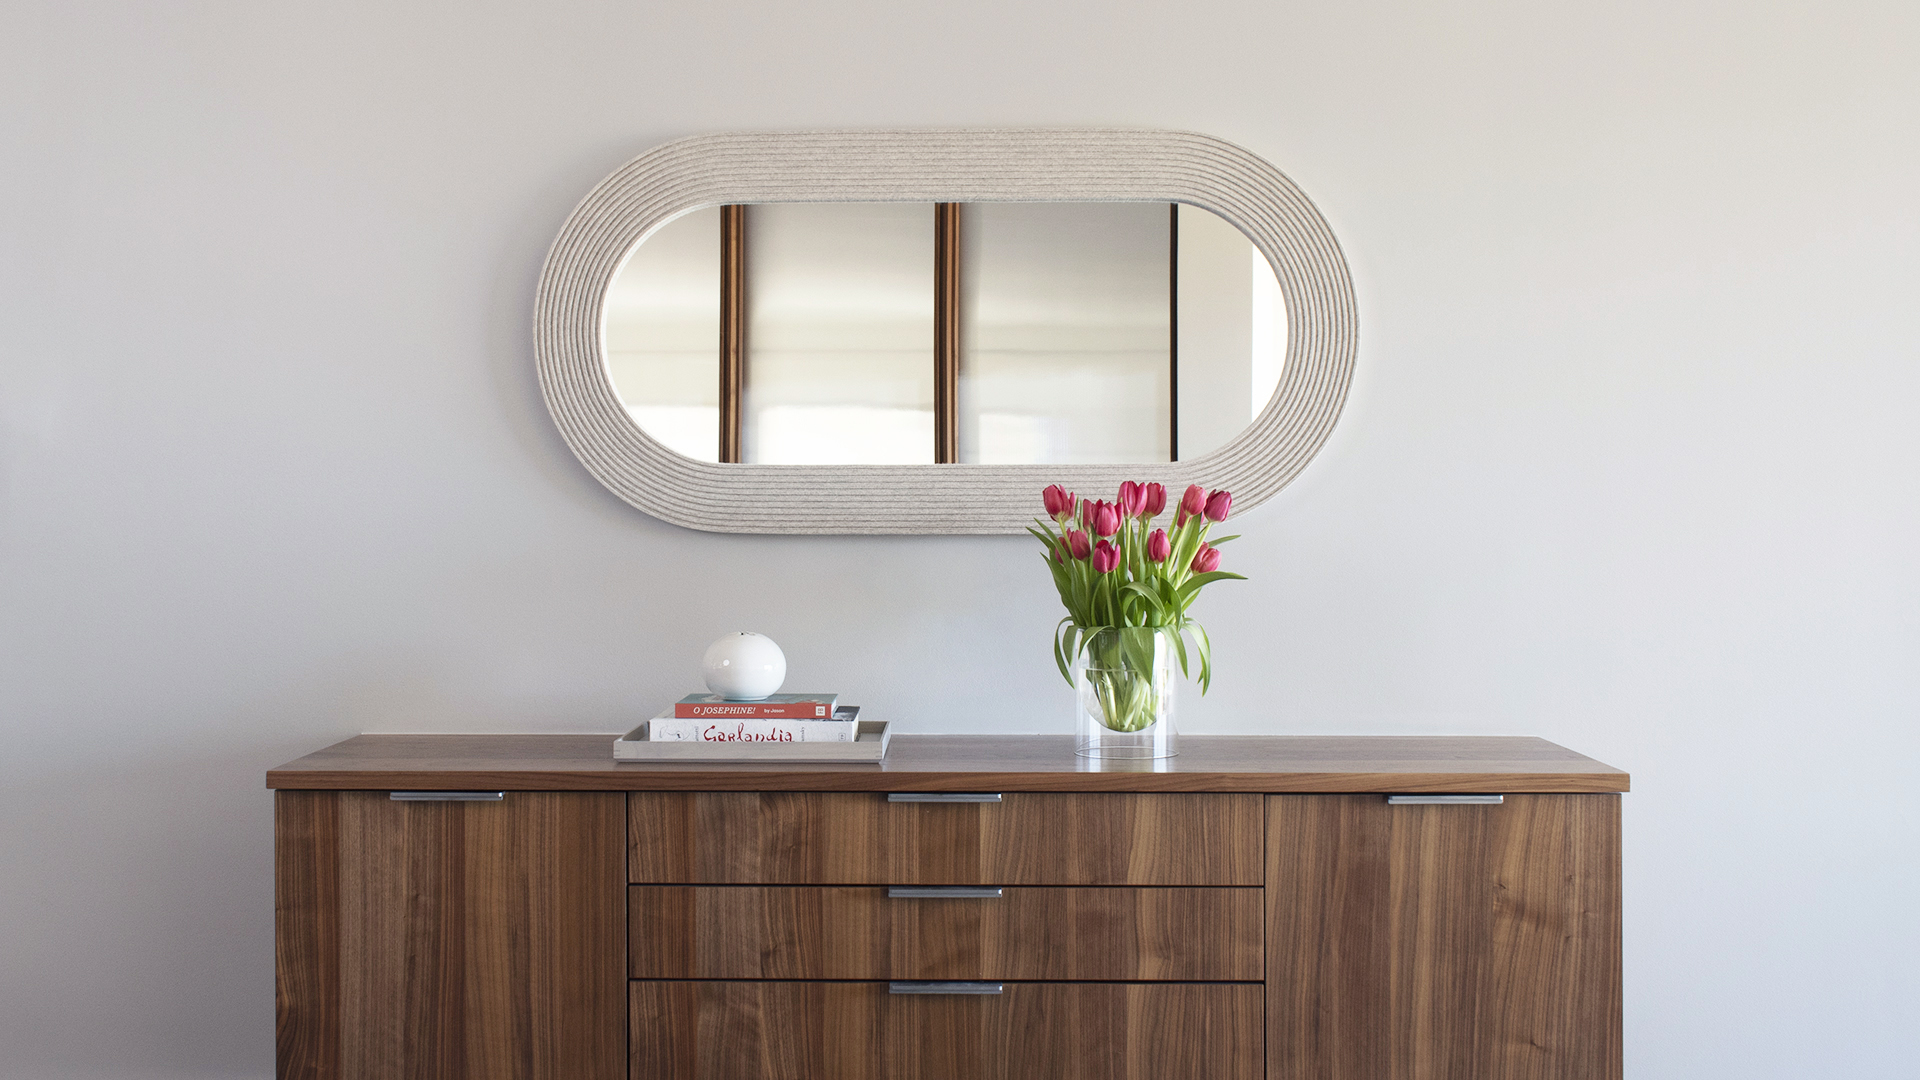 Pill shaped mirror in light gray felt hung horizontal over a sideboard with pink tulips